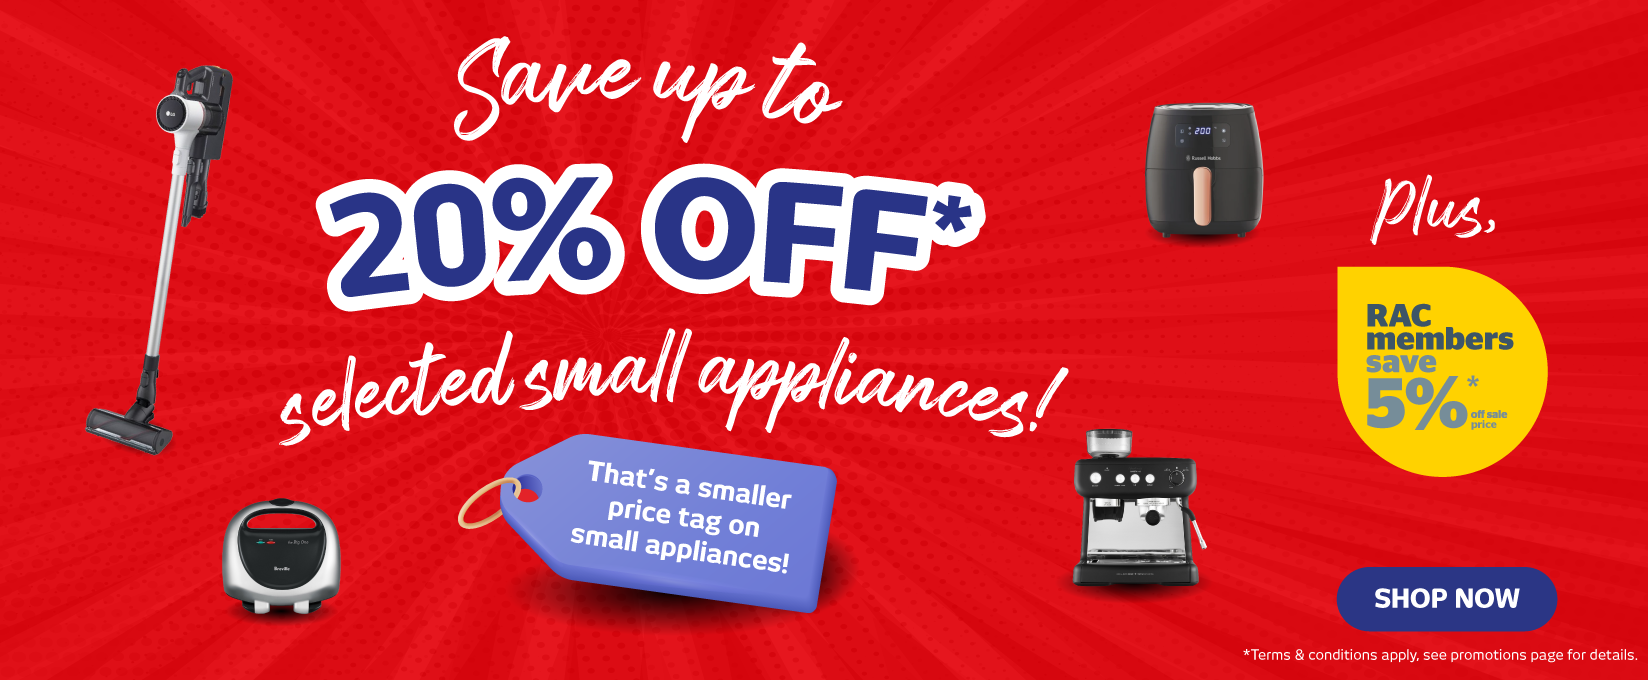 Save Up To 20% On Selected Small Appliances at Retravision